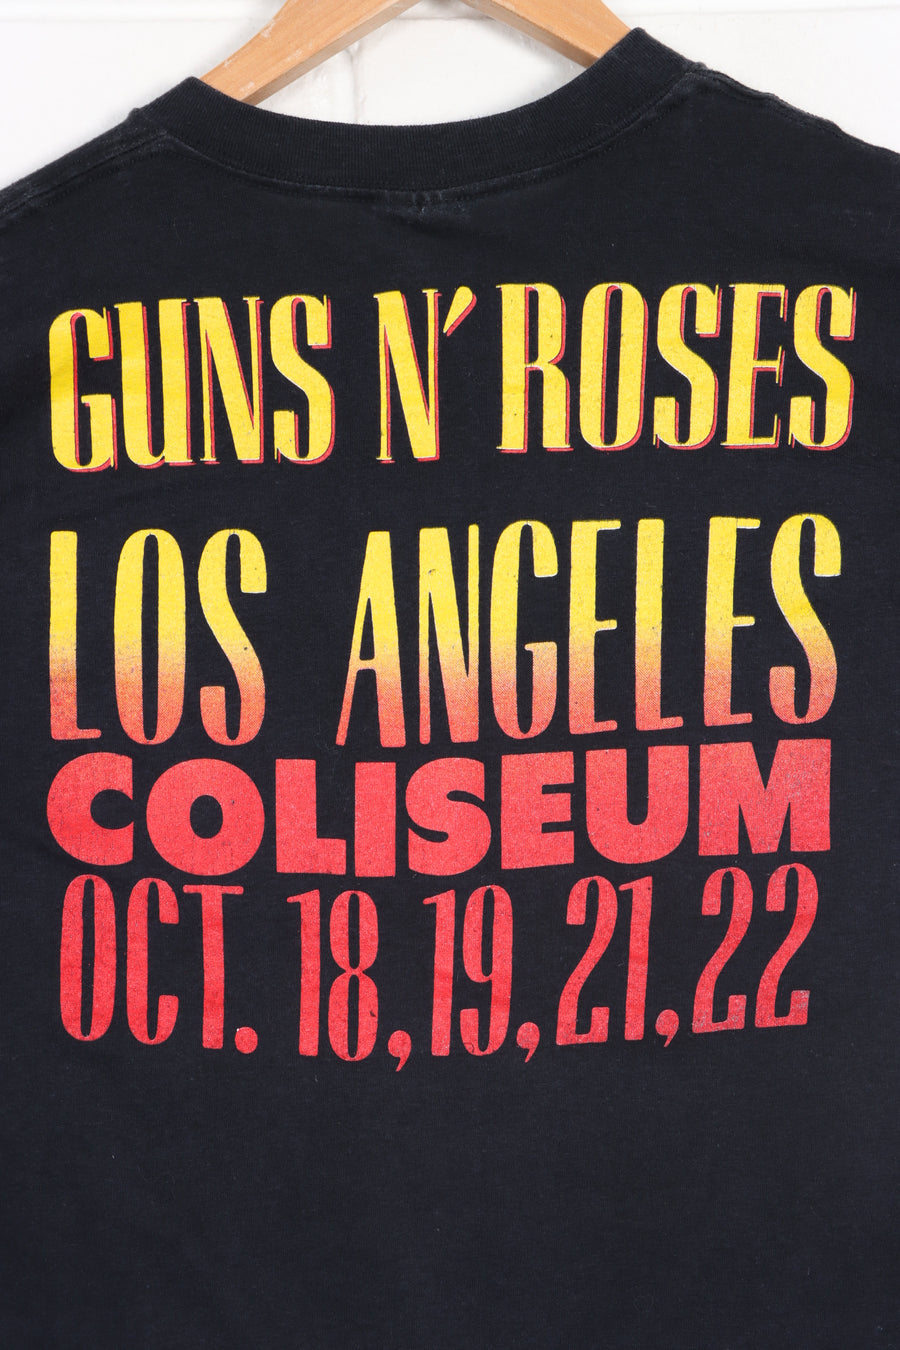 Guns N' Roses 1989 'Stoned in LA' Front Back T-Shirt USA Made (M)